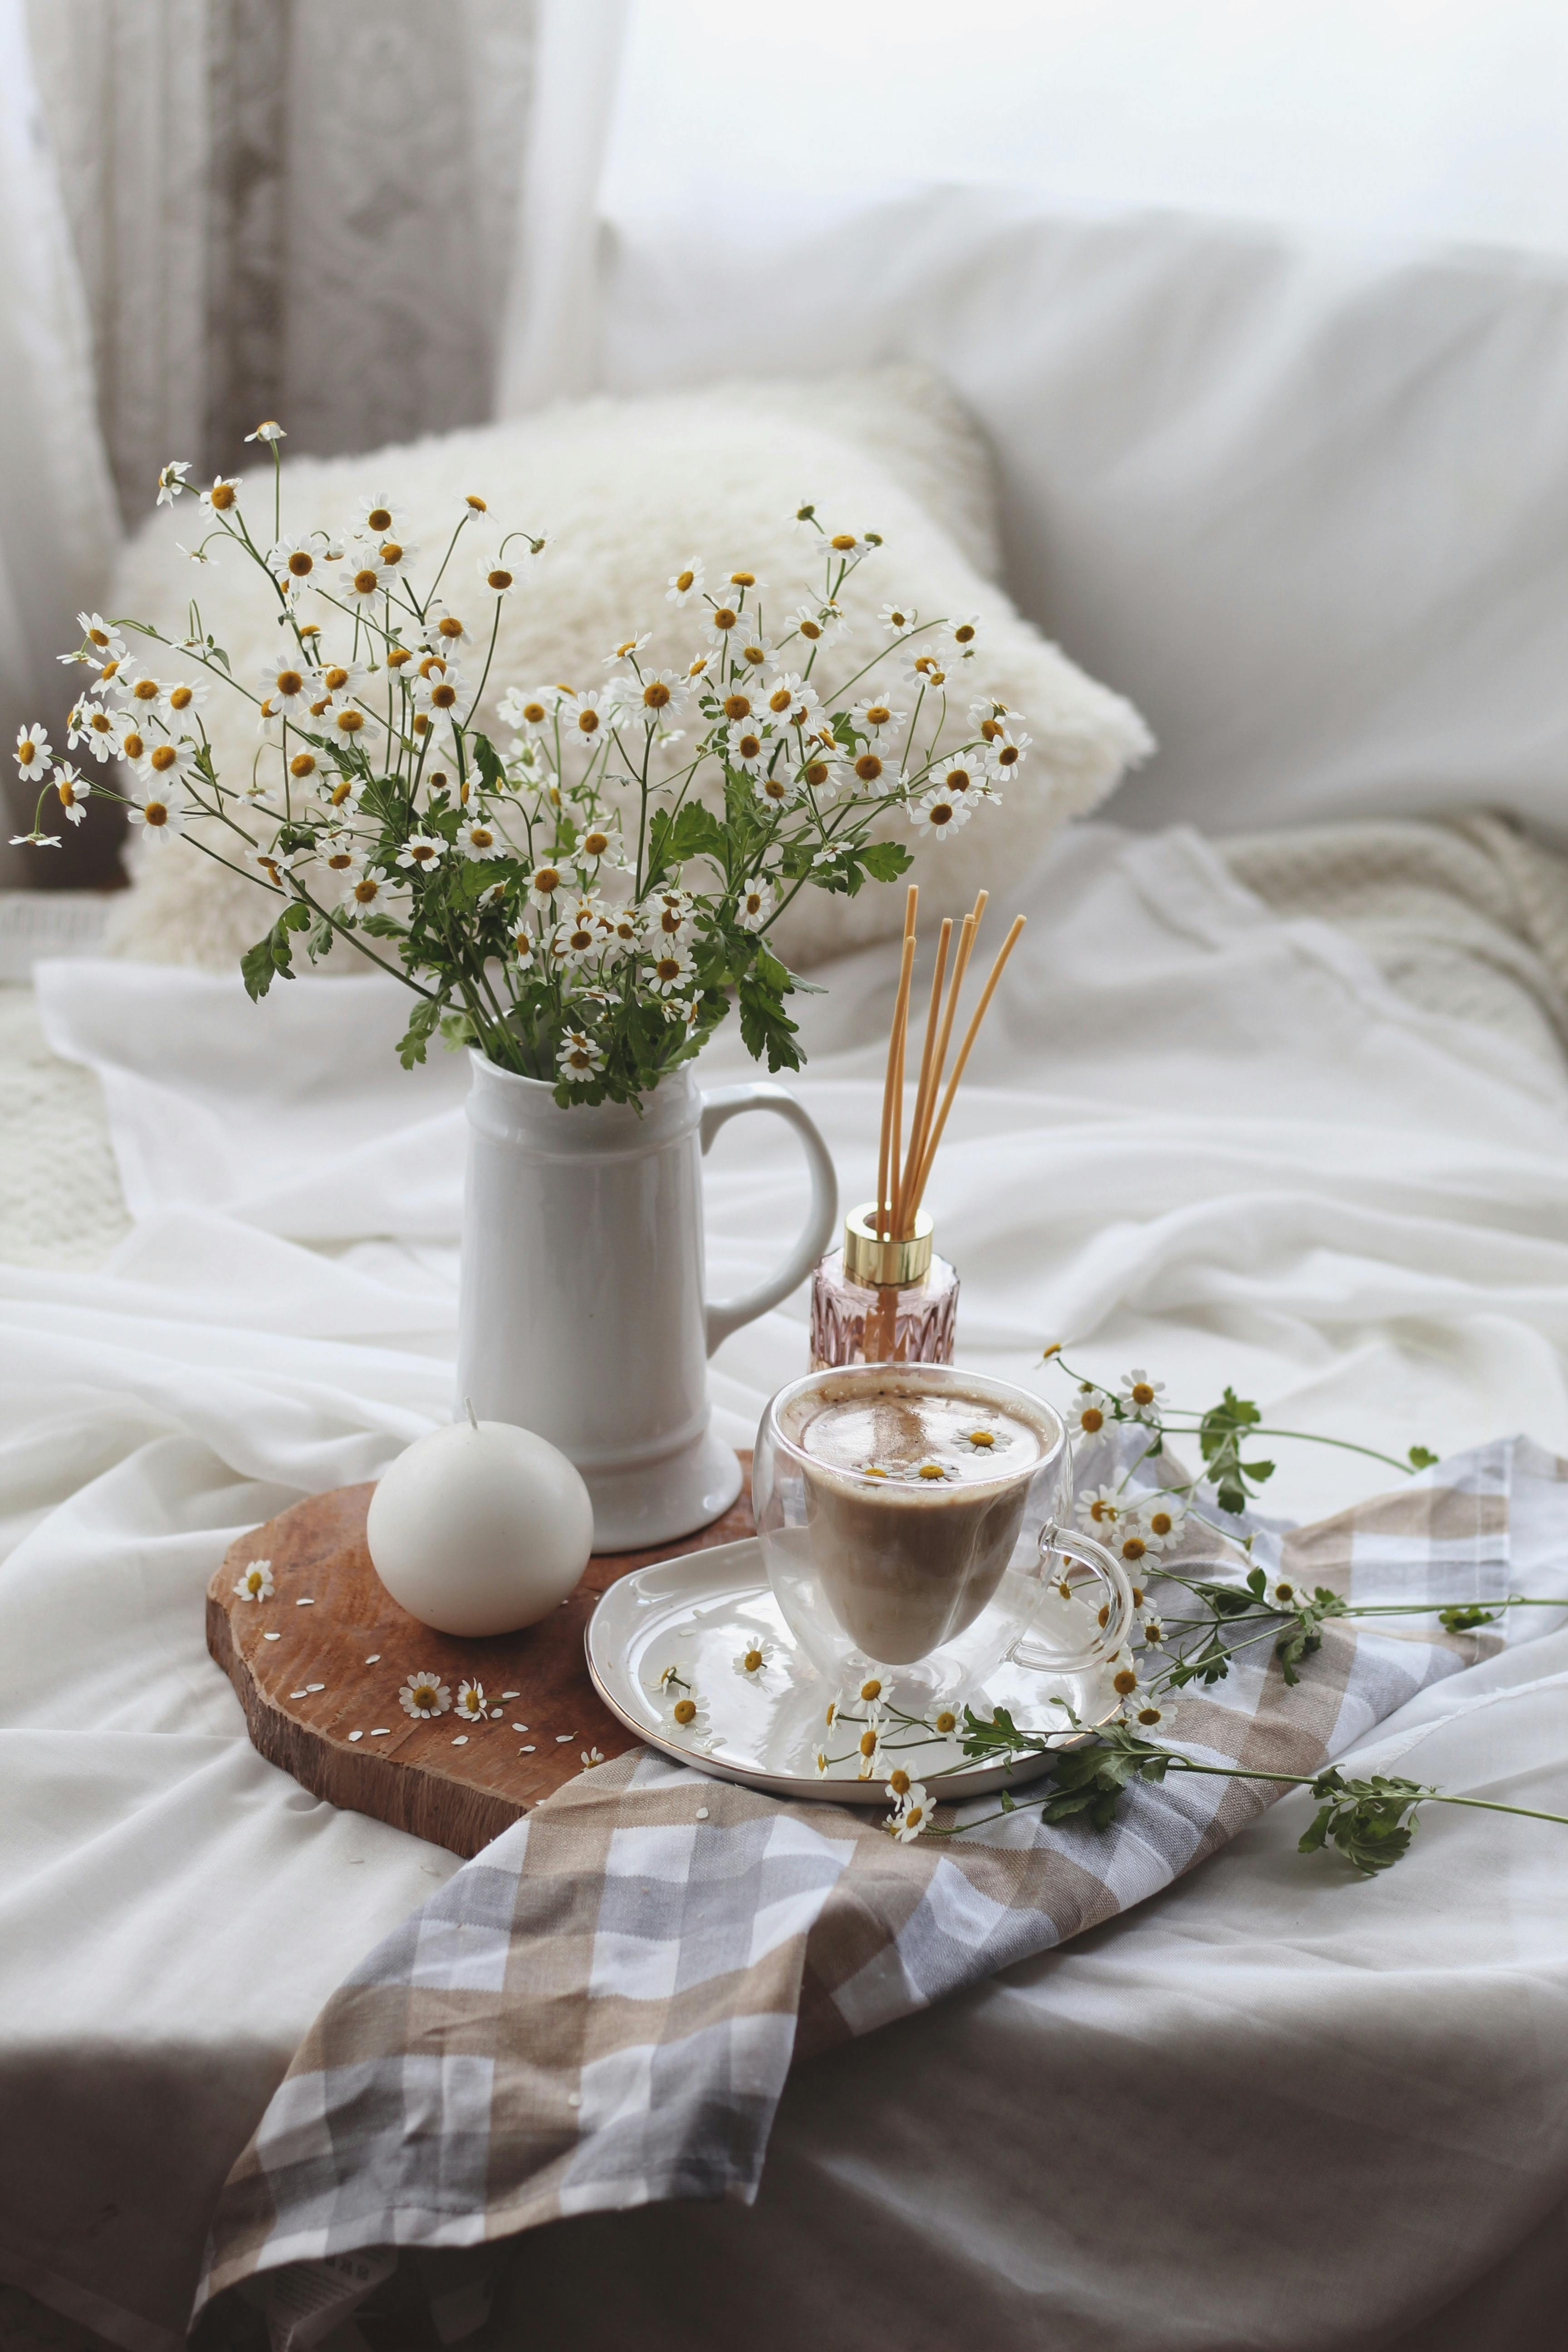 White Flower In A Vase With Coffee And Orange Juice On Table Stock Photo -  Download Image Now - iStock